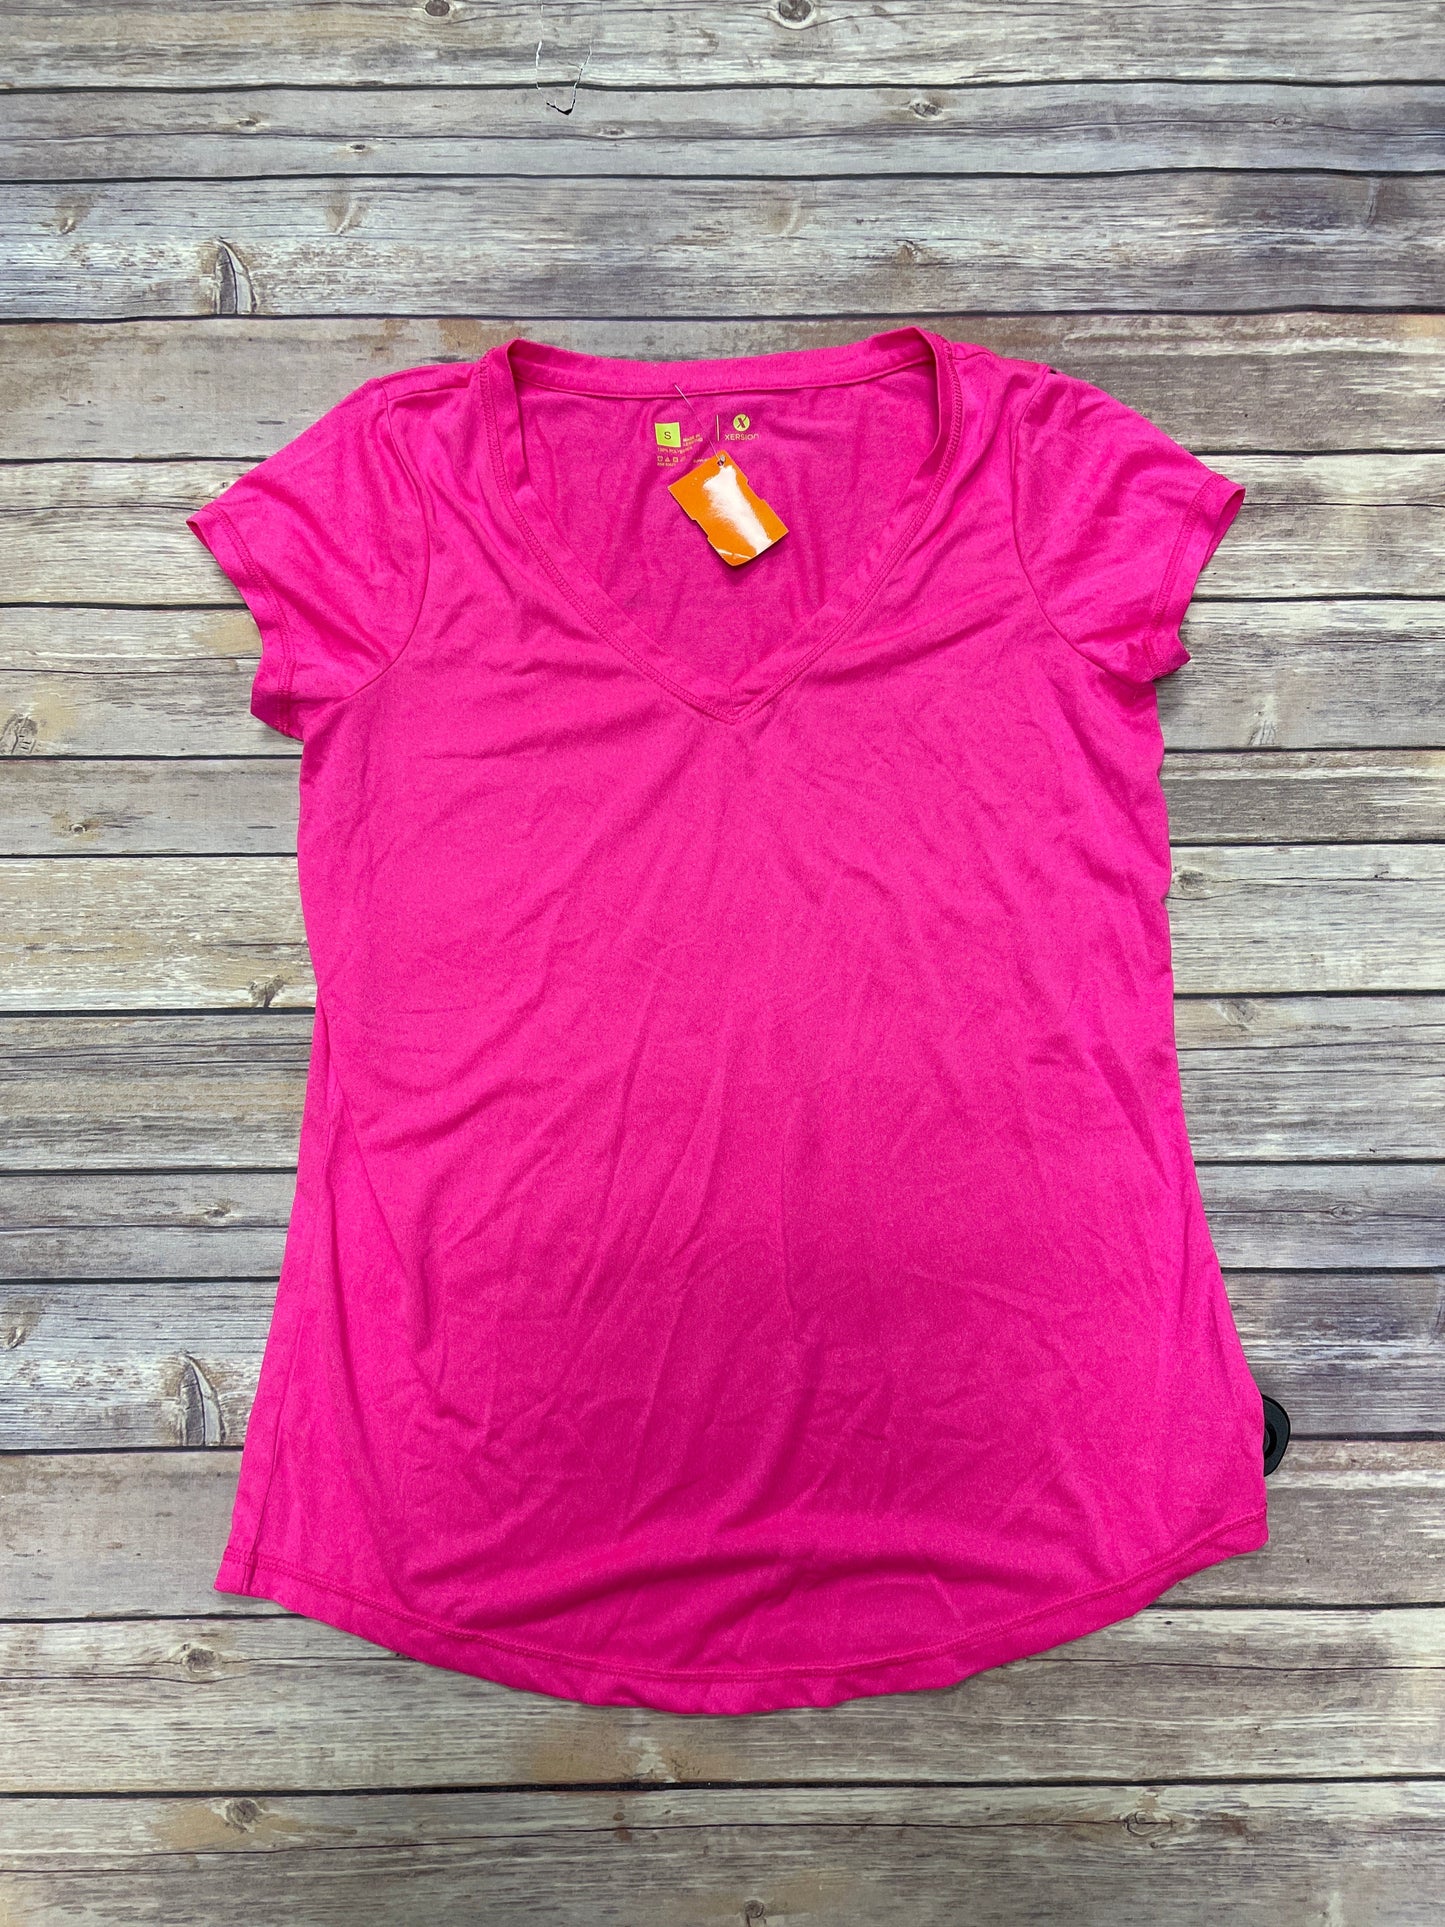 Athletic Top Short Sleeve By Xersion  Size: S